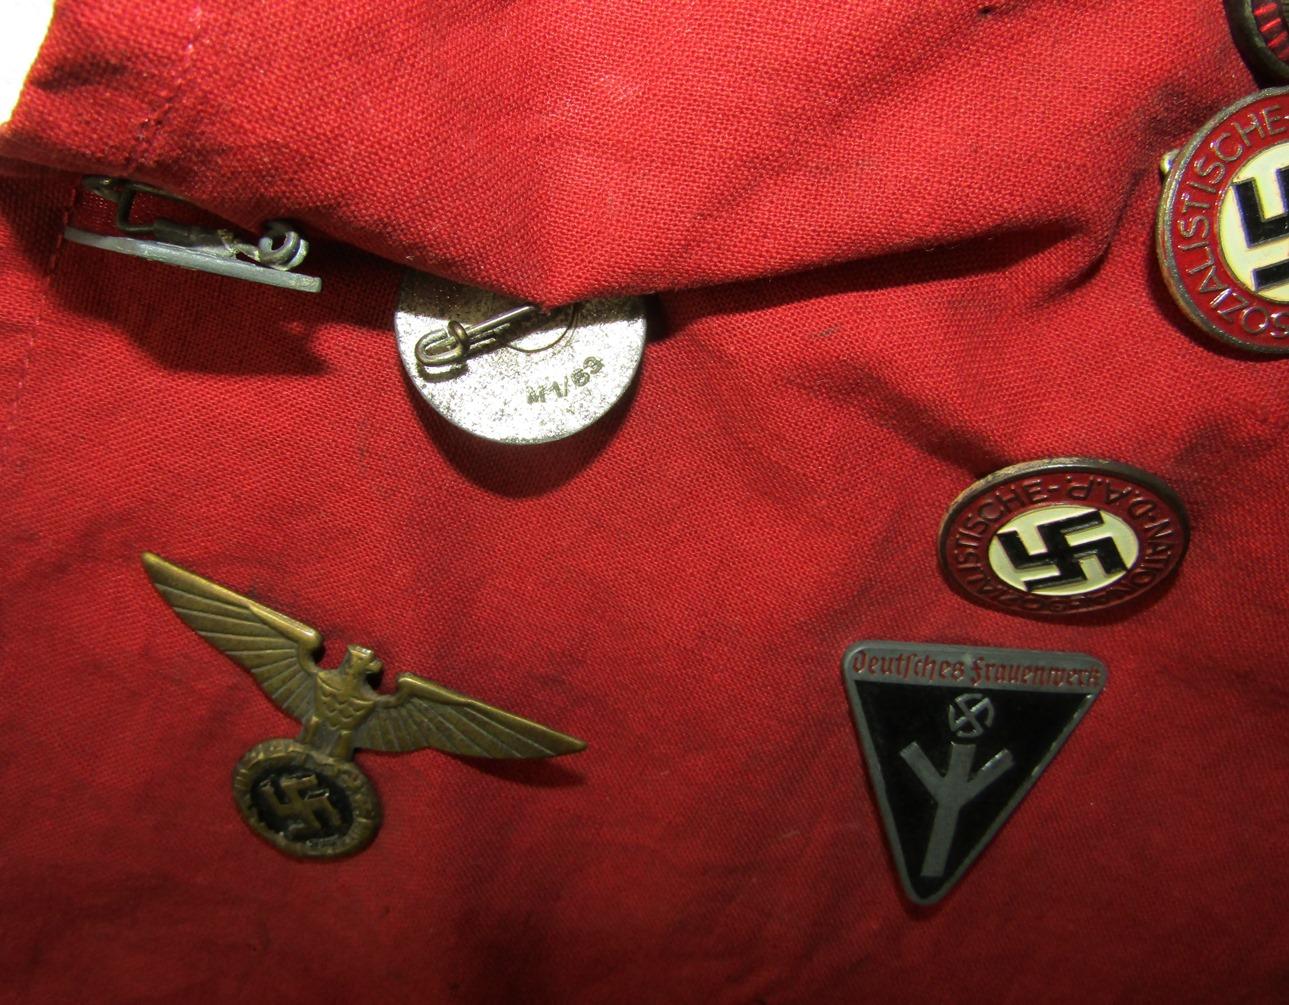 Ww2 Vet Bringback-Small NSDAP Banner With Vet Applied Insignia